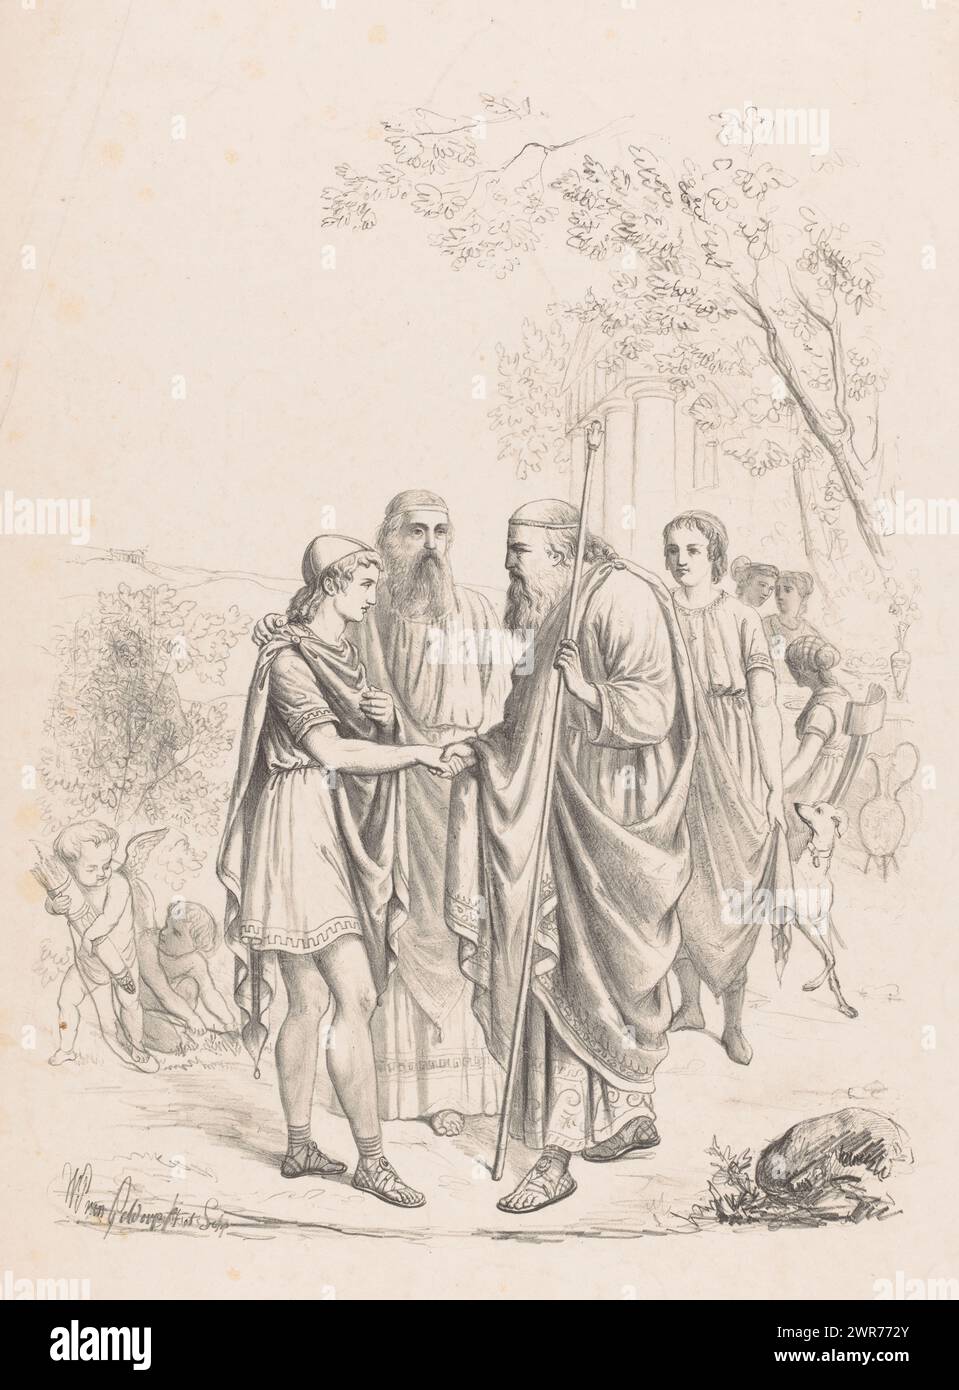 Telemachus visits Nestor on the island of Pylon, Telemachus searches for his father Ulysses, was led by Pallas to Prince Nestor on the island of Pylos to obtain information, Art album by W. P. van Geldorp (series title), Telemachus has left home to visit his father to find Odysseus. Athena, disguised as an old man named Mentor, accompanies him. She gives him the courage to speak to King Nestor., print maker: Wilhelmus Petrus van Geldorp, Rotterdam, 1870, paper, height 495 mm × width 345 mm, print Stock Photo